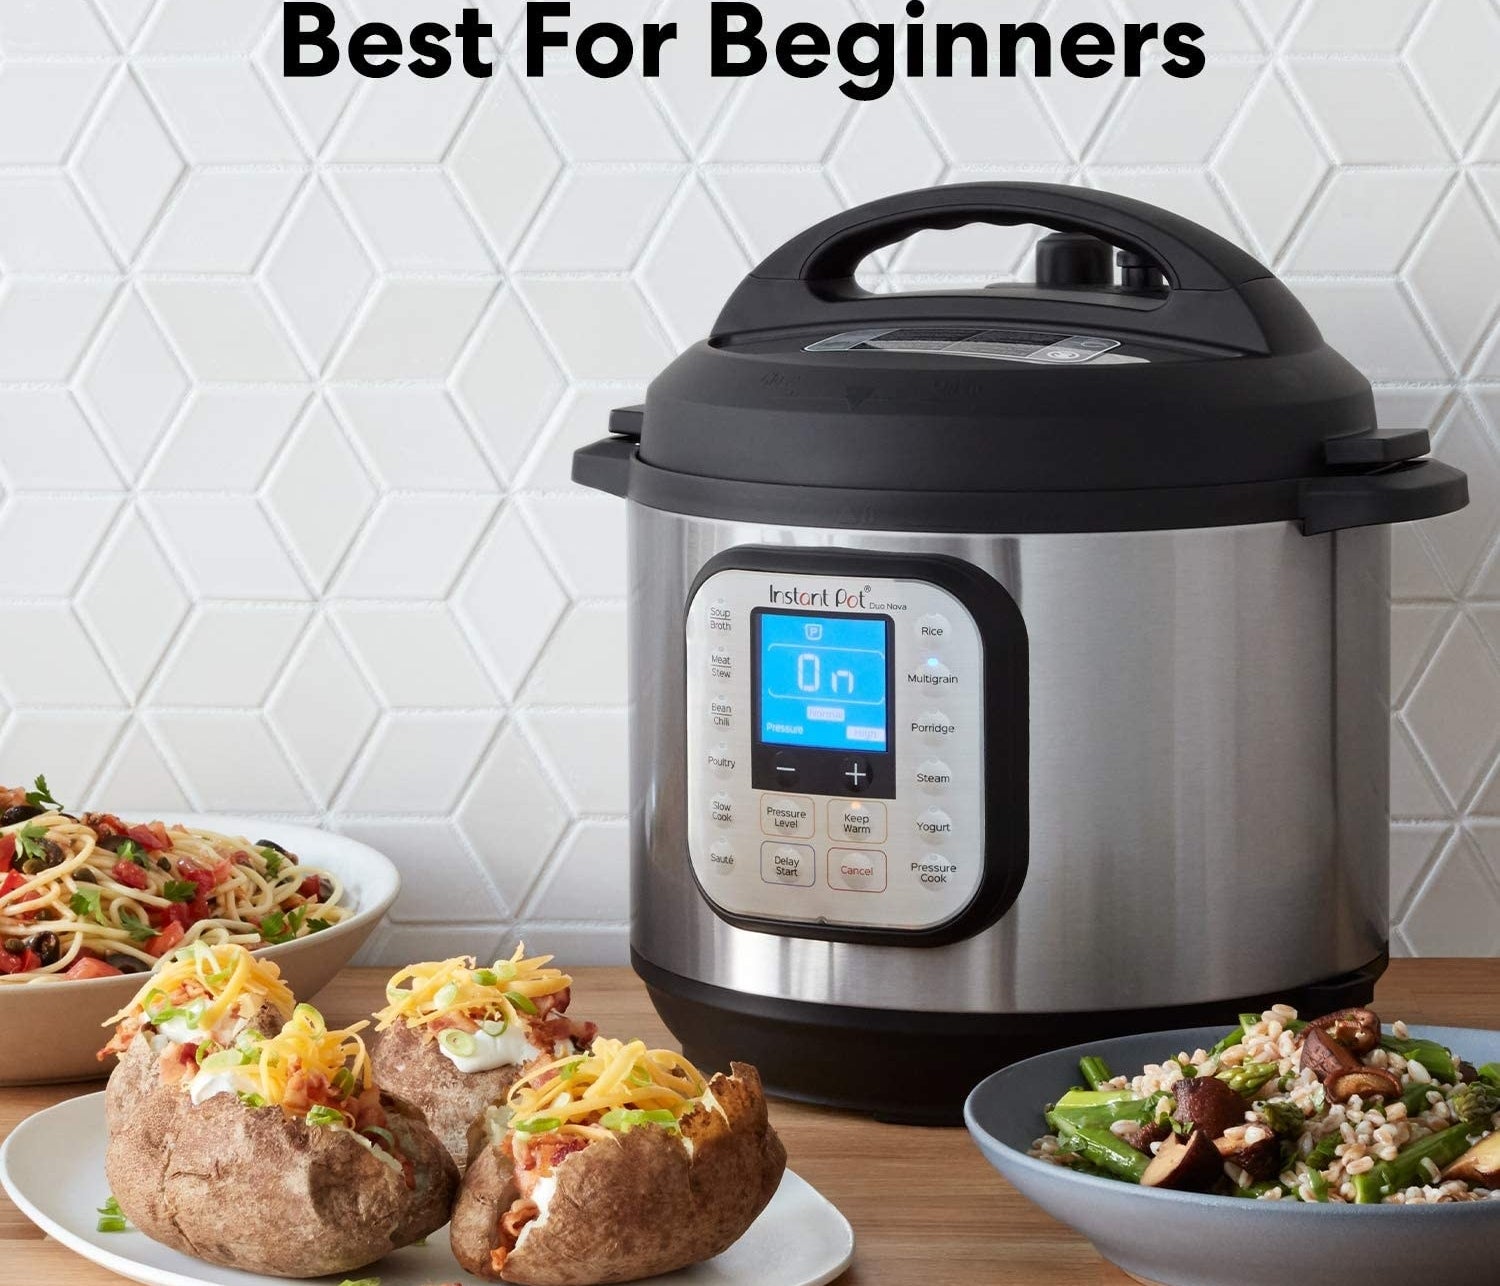 An Instant Pot next to plates of baked potatoes and other delicious meals